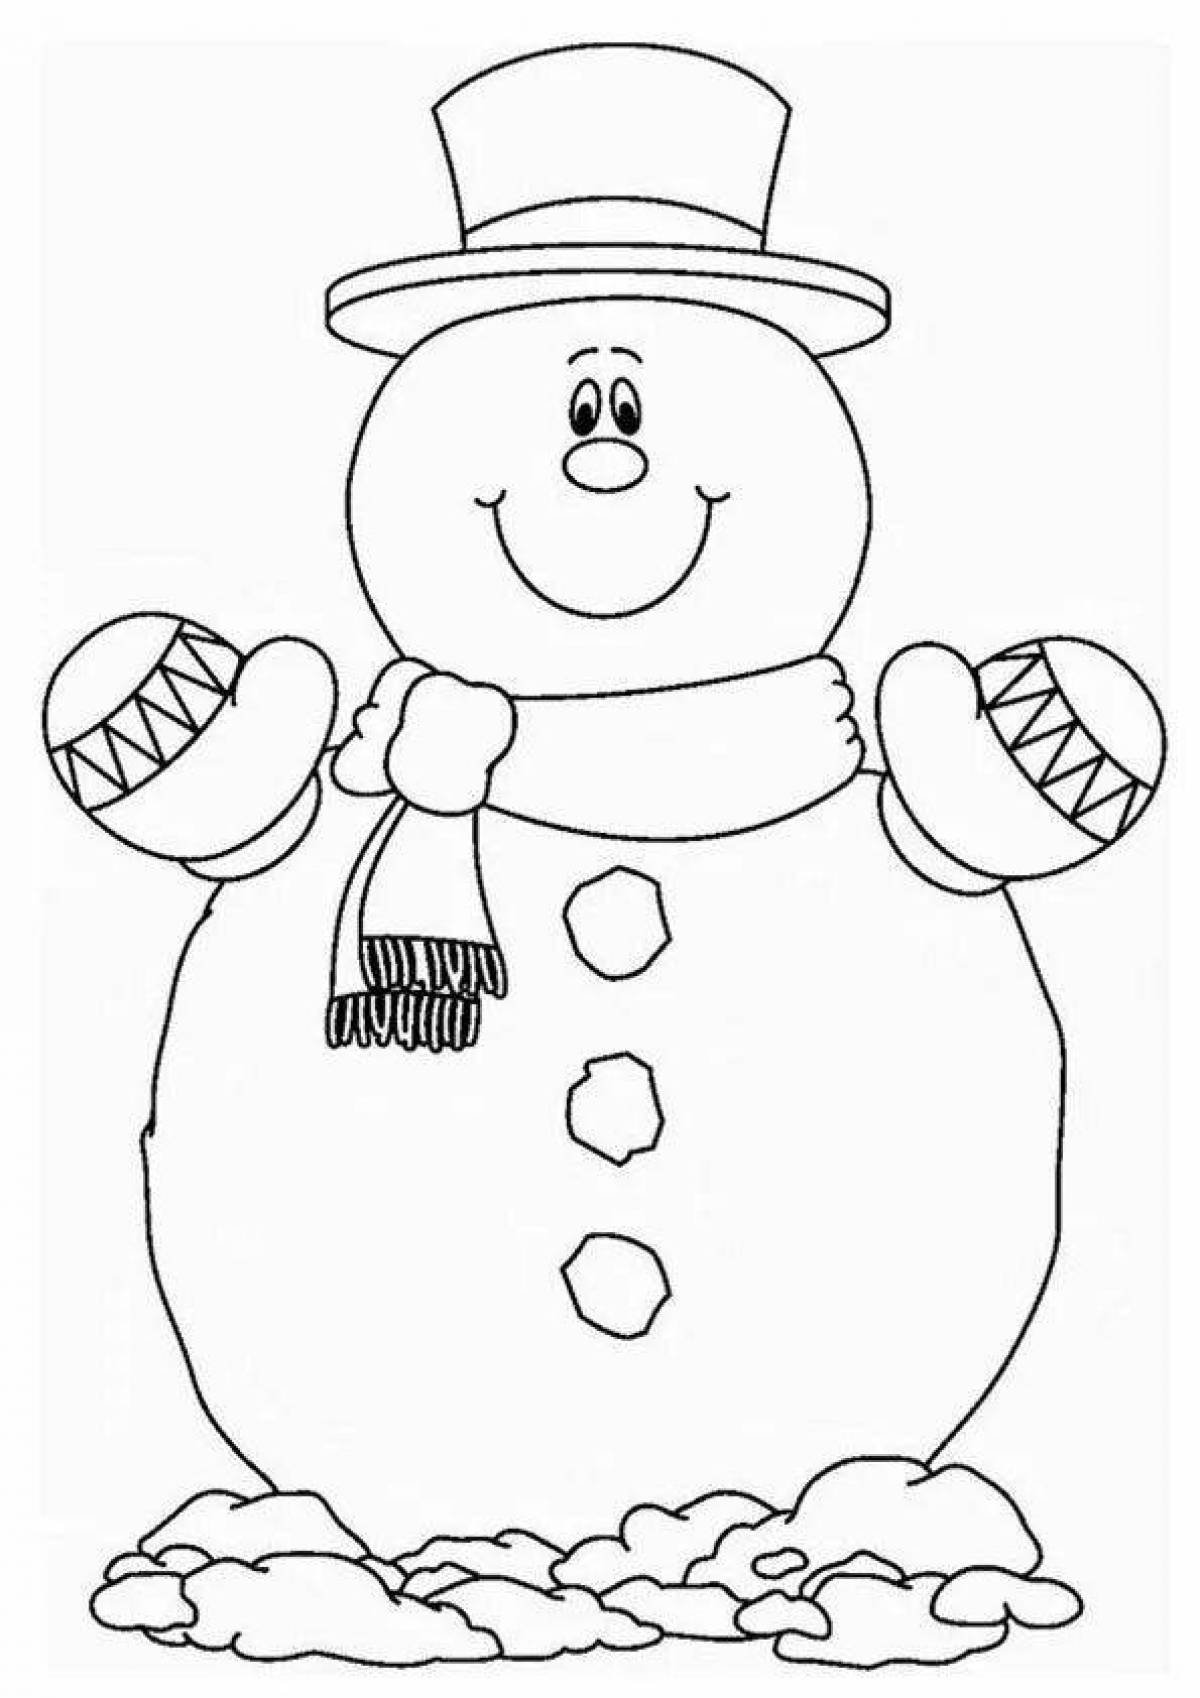 Explosive coloring book snowman for children 2-3 years old